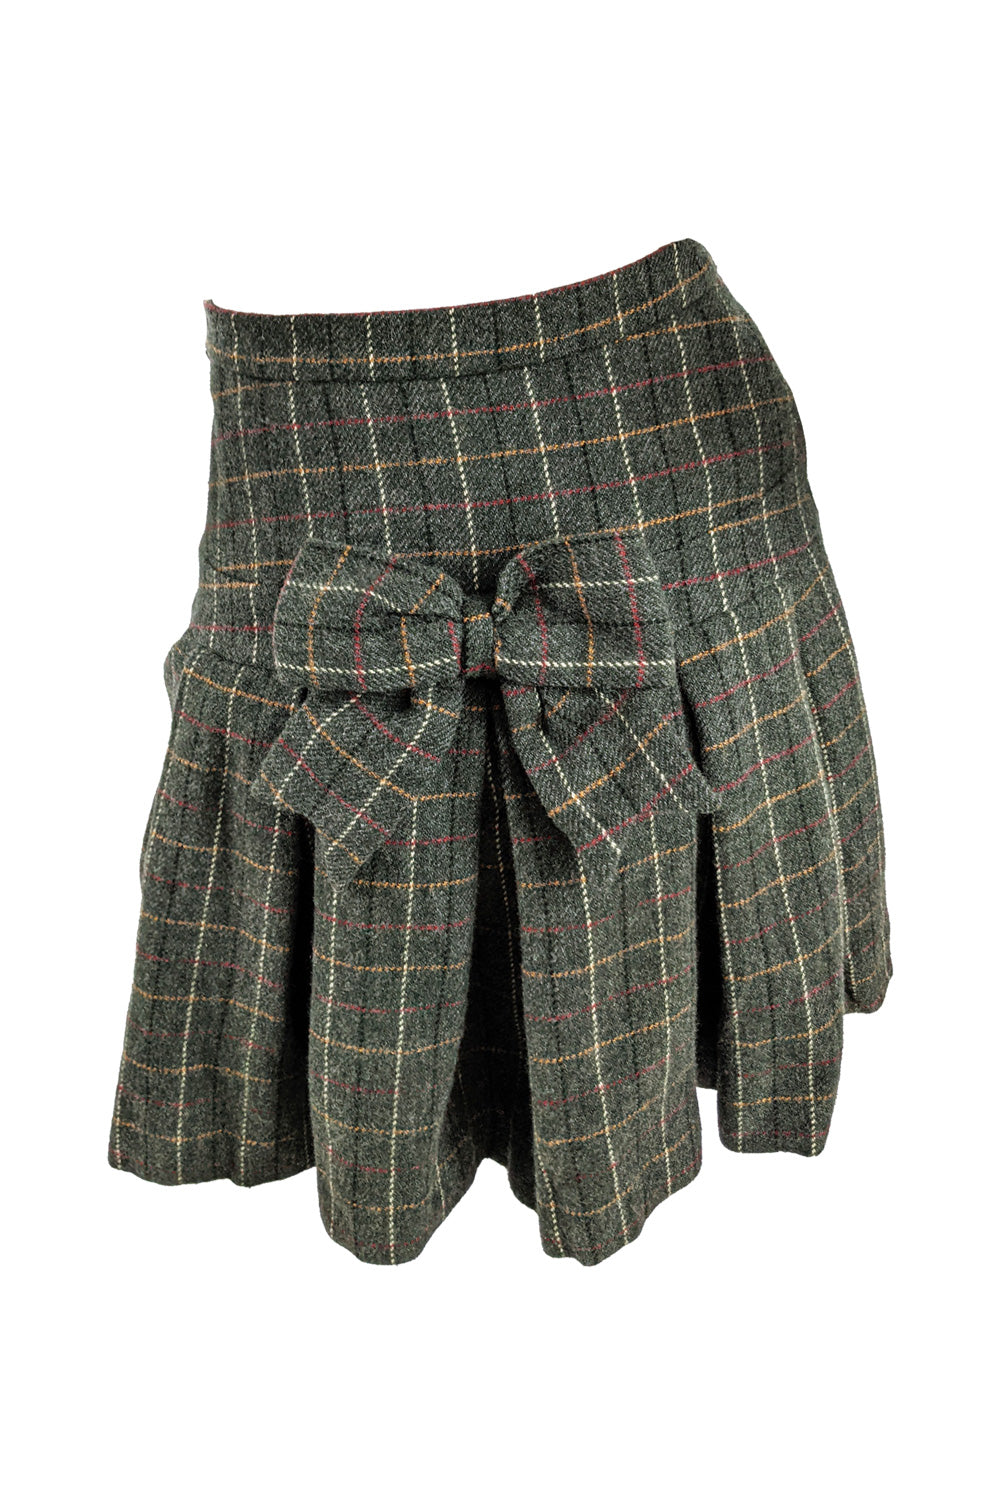 Moschino Vintage Green Wool Pleated Bow Mini Skirt, 1990s